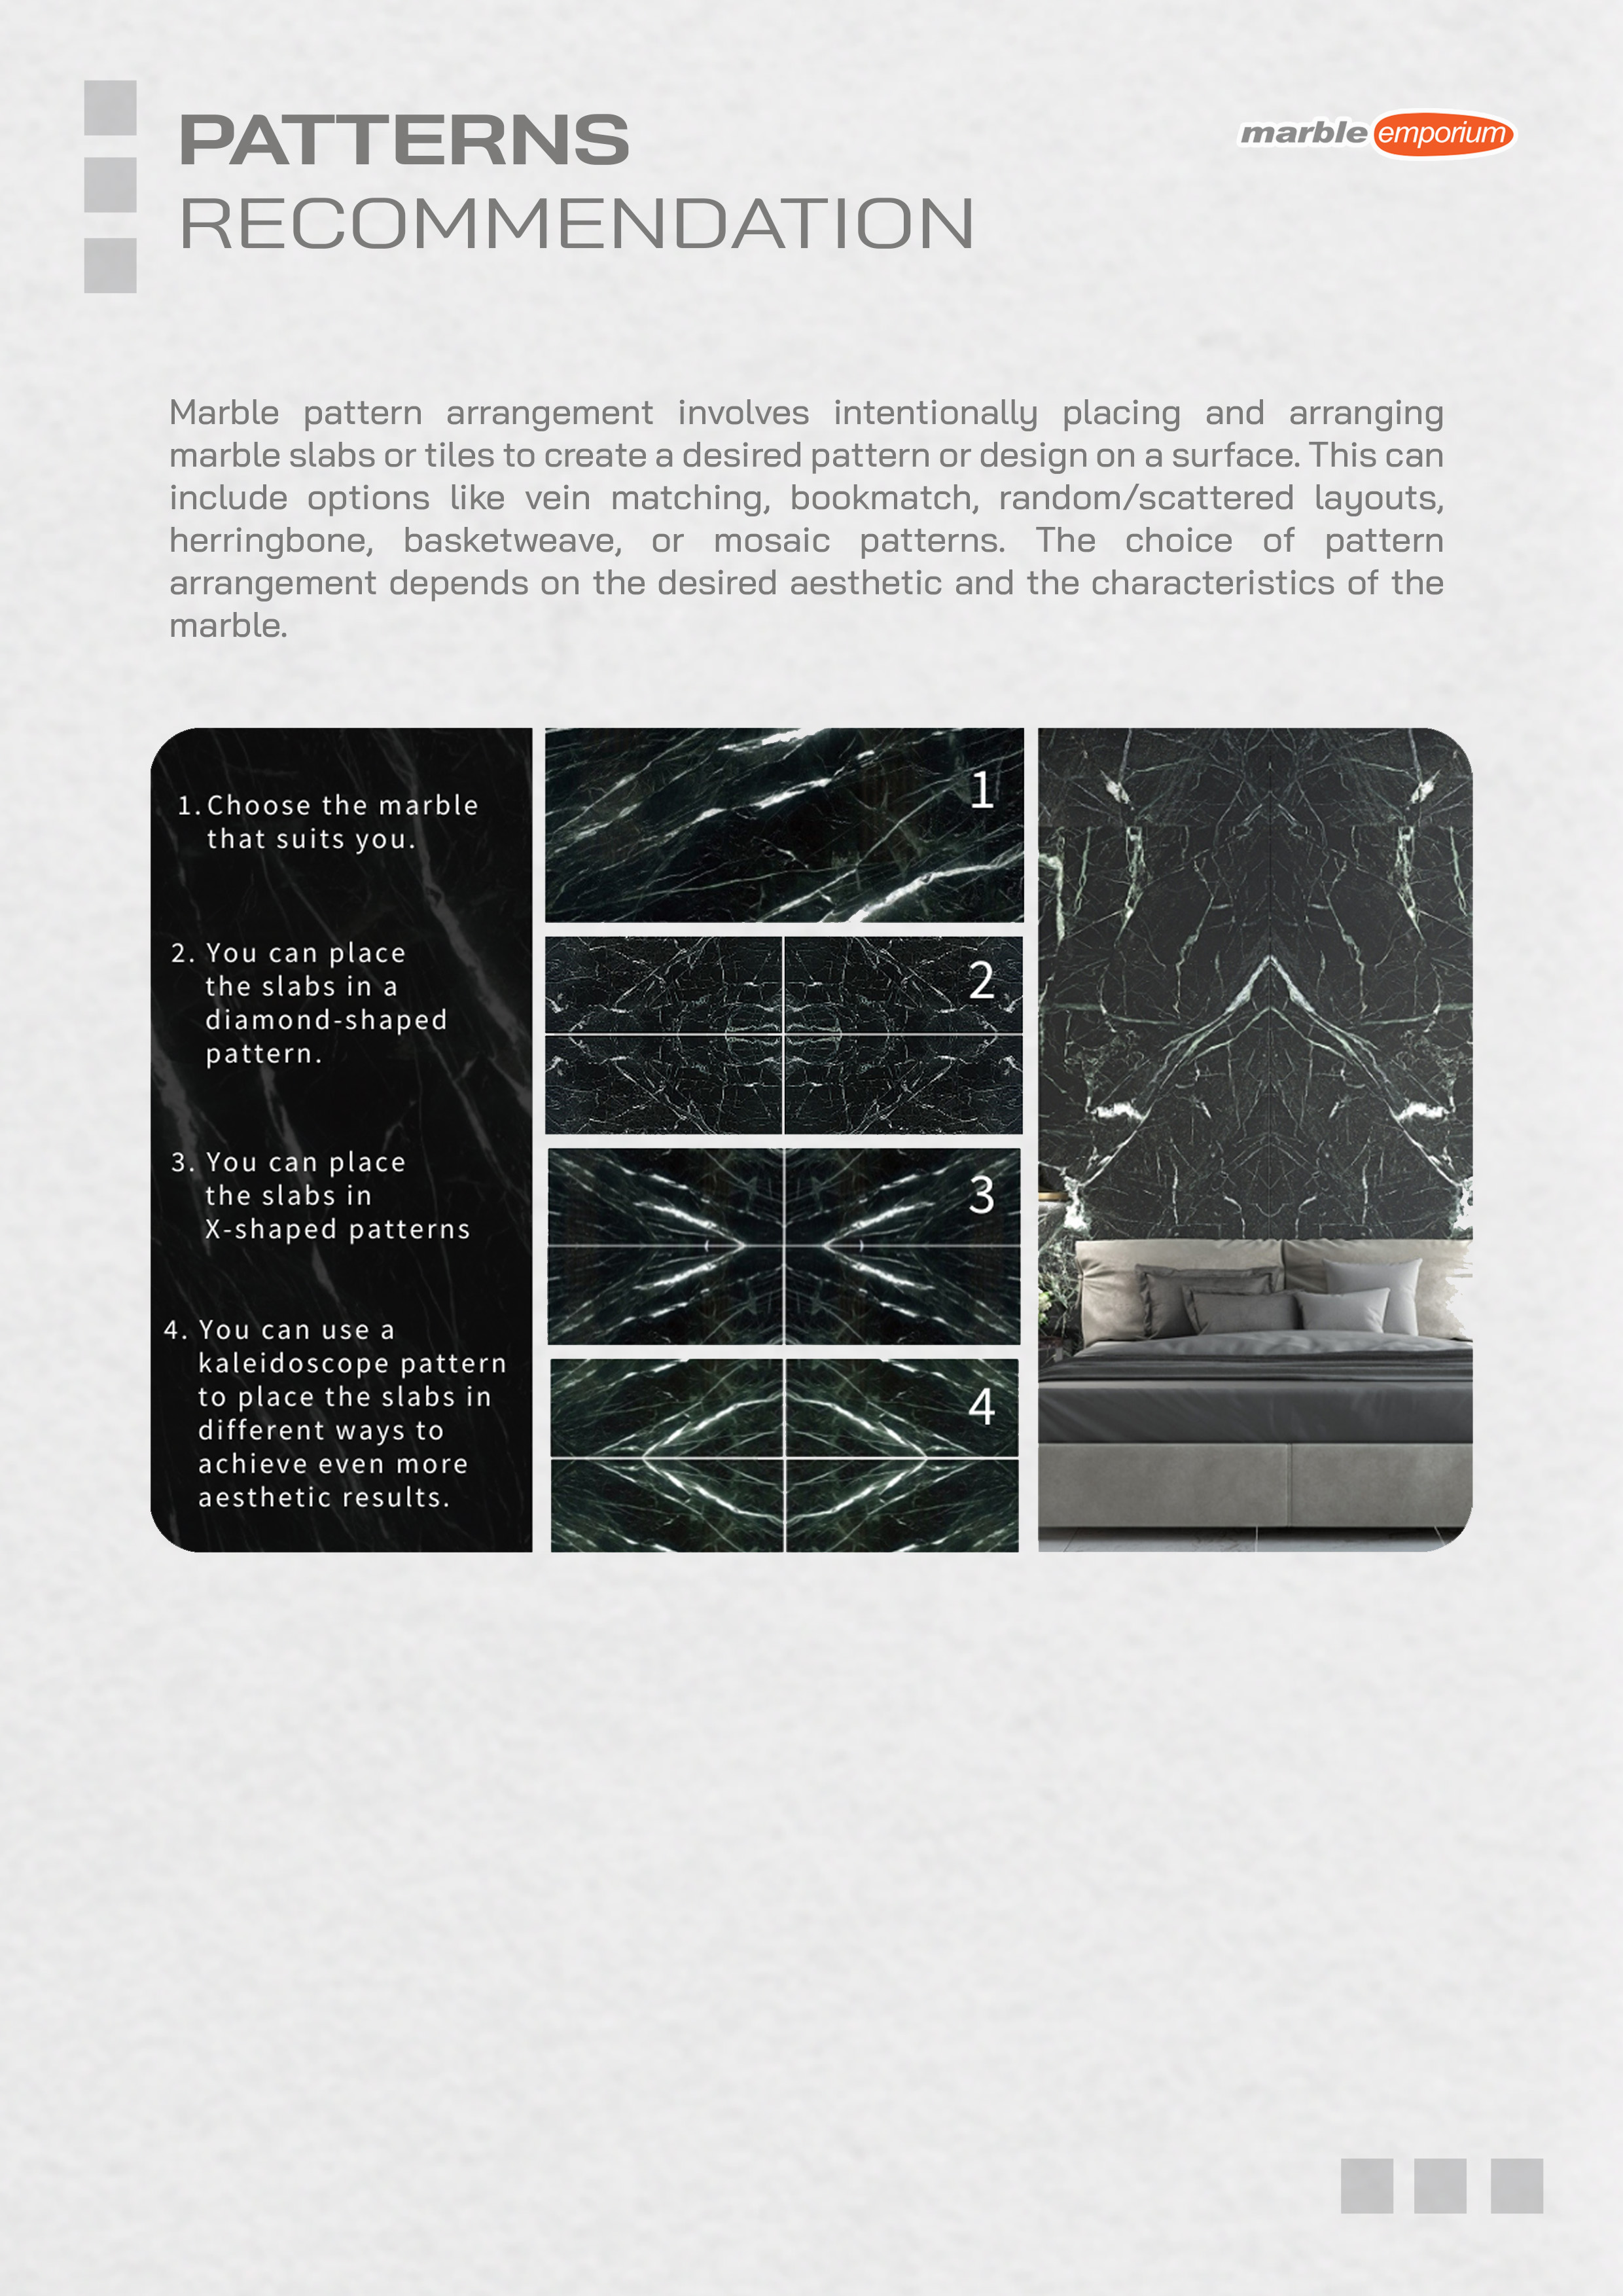 Marble Emporium | How we work page 17 - Patterns recommendation - Marble pattern arrangement involves intentionally placing and arranging marble slabs or tiles to create a desired pattern or design on a surface. This can include options like vein matching, bookmatch, random/scattered layouts, herringbone, basketweave, or mosaic patterns. The choice of pattern arrangement depends on the desired aesthetic and the characteristics of the marble. | 1-Choose the marble that suits you., 2-You can place the slabs in a diamond-shaped pattern., 3-You can place the slabs in X-shaped patterns., 4-You can use a kaleidoscope pattern to place the slabs in different ways to achieve even more aesthetic results.